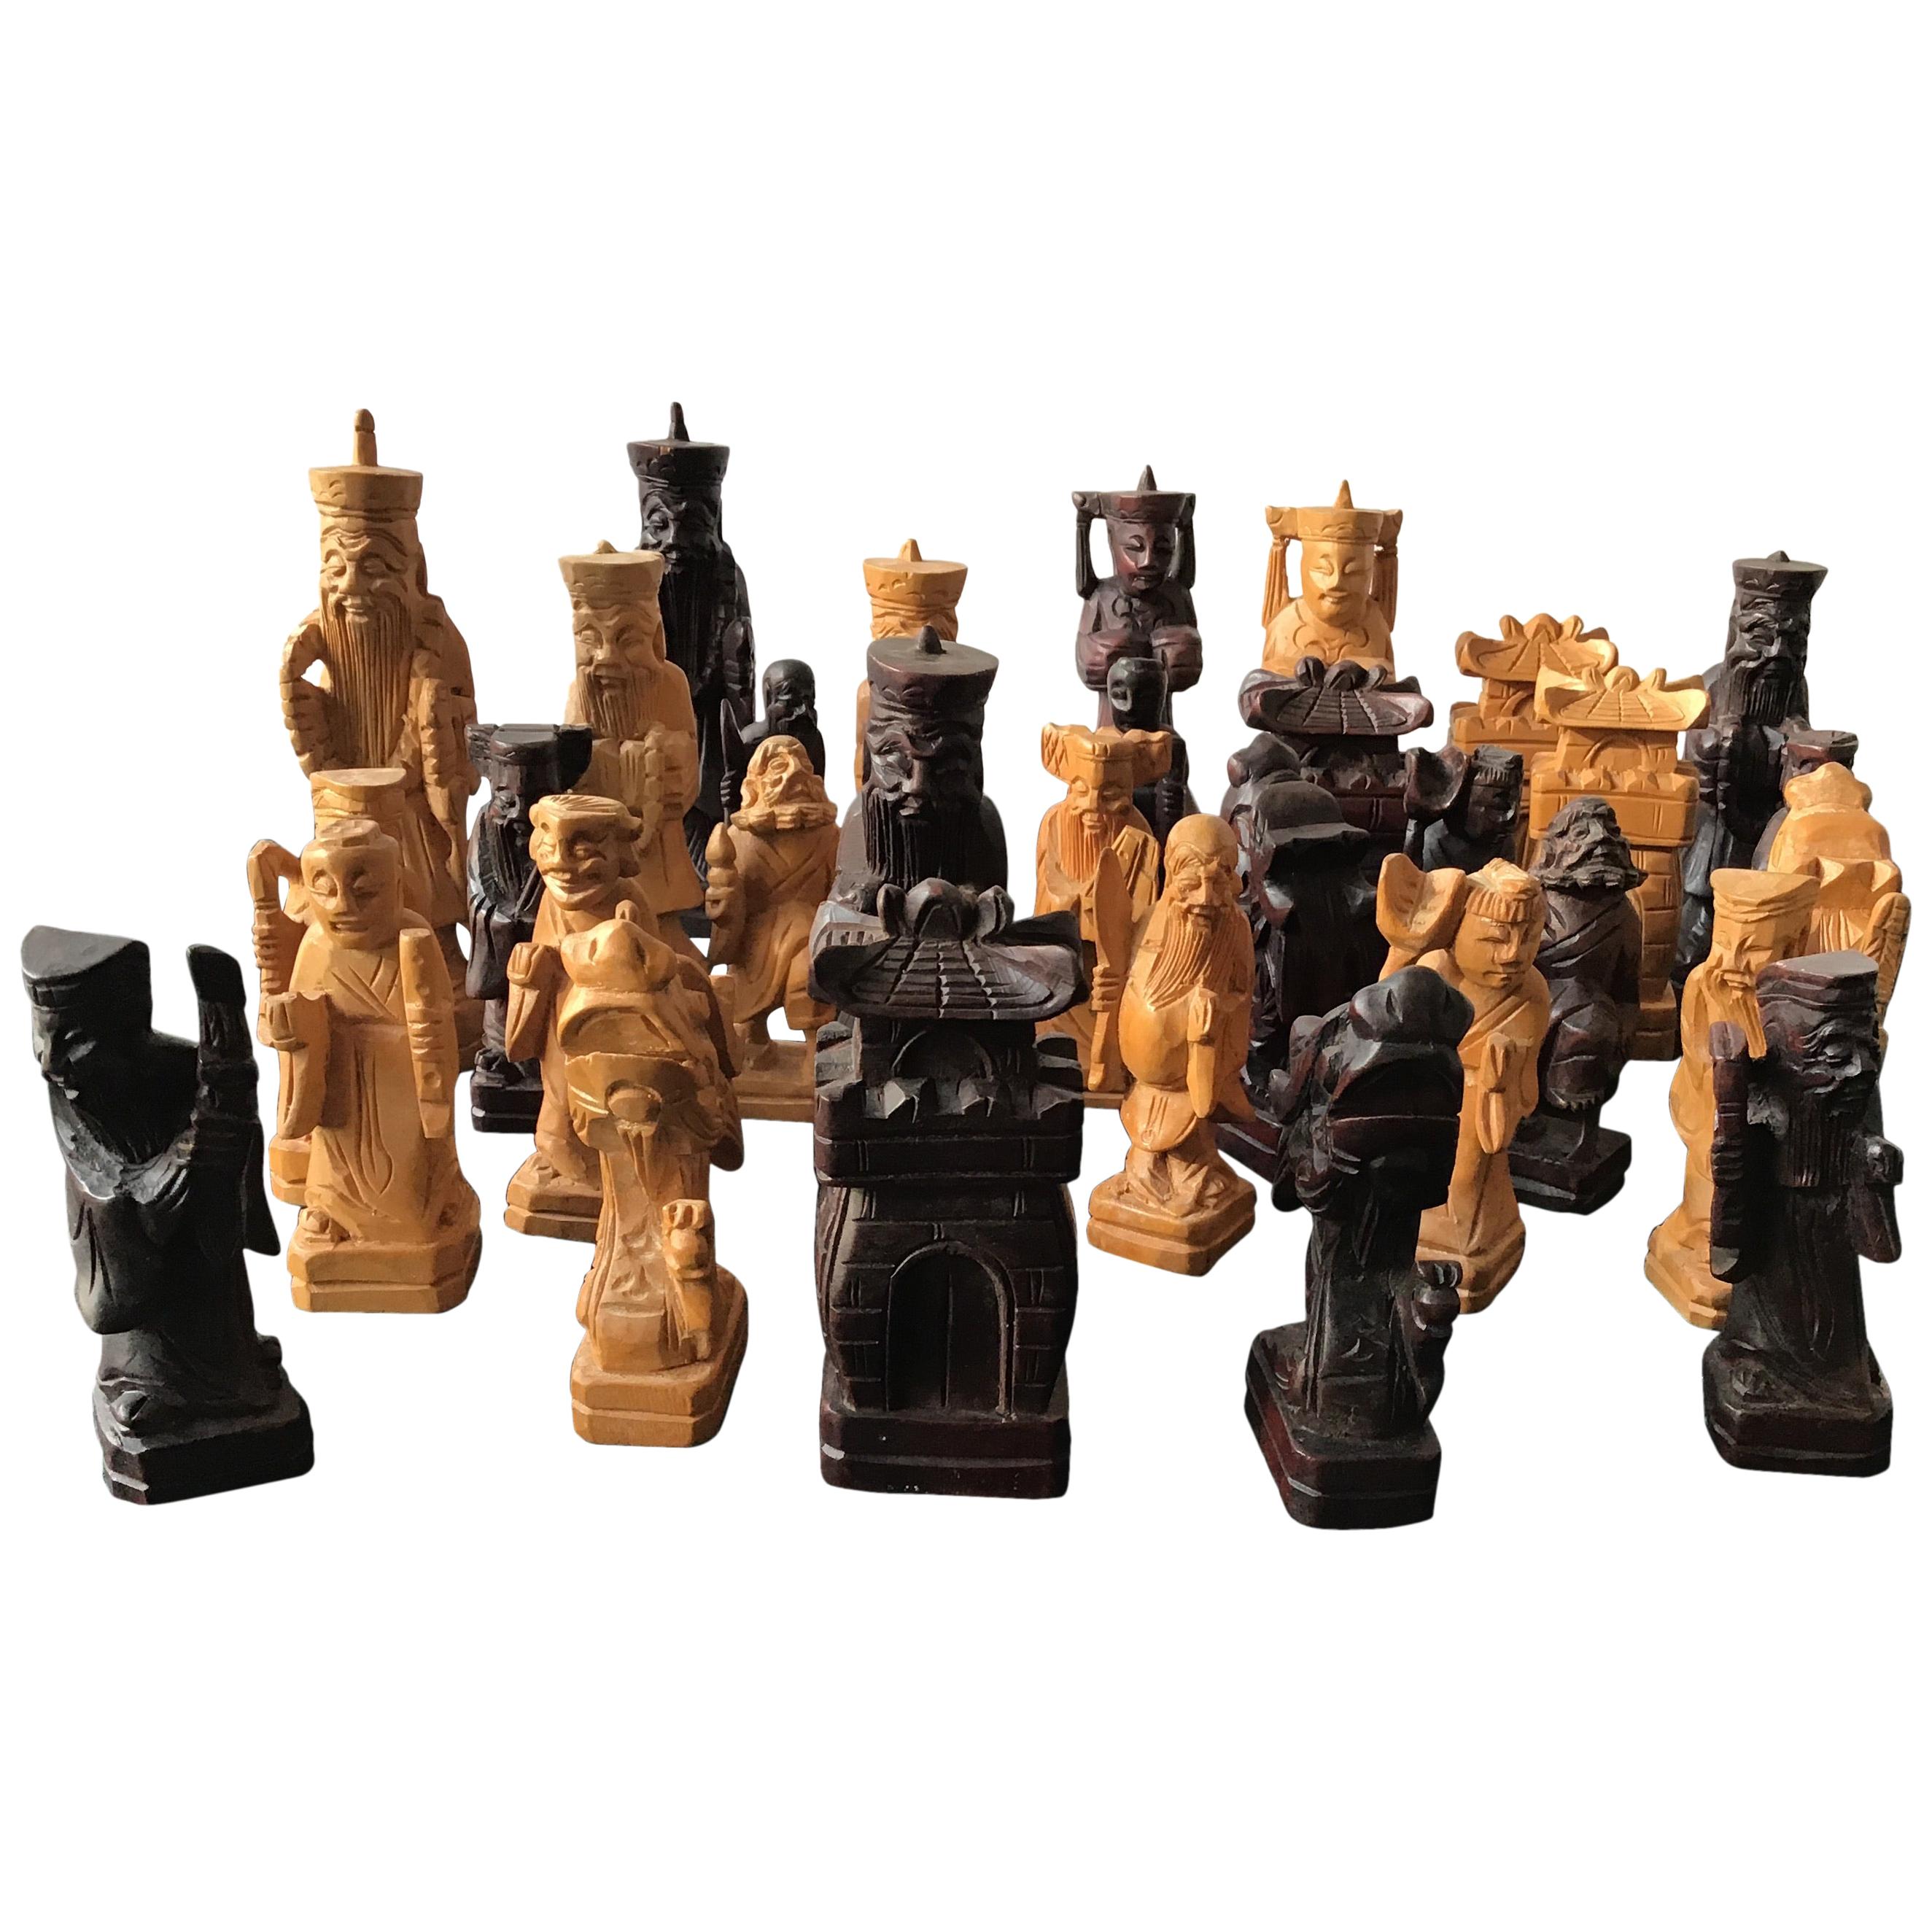 32 Hand Carved Wooden Asian Chess Pieces